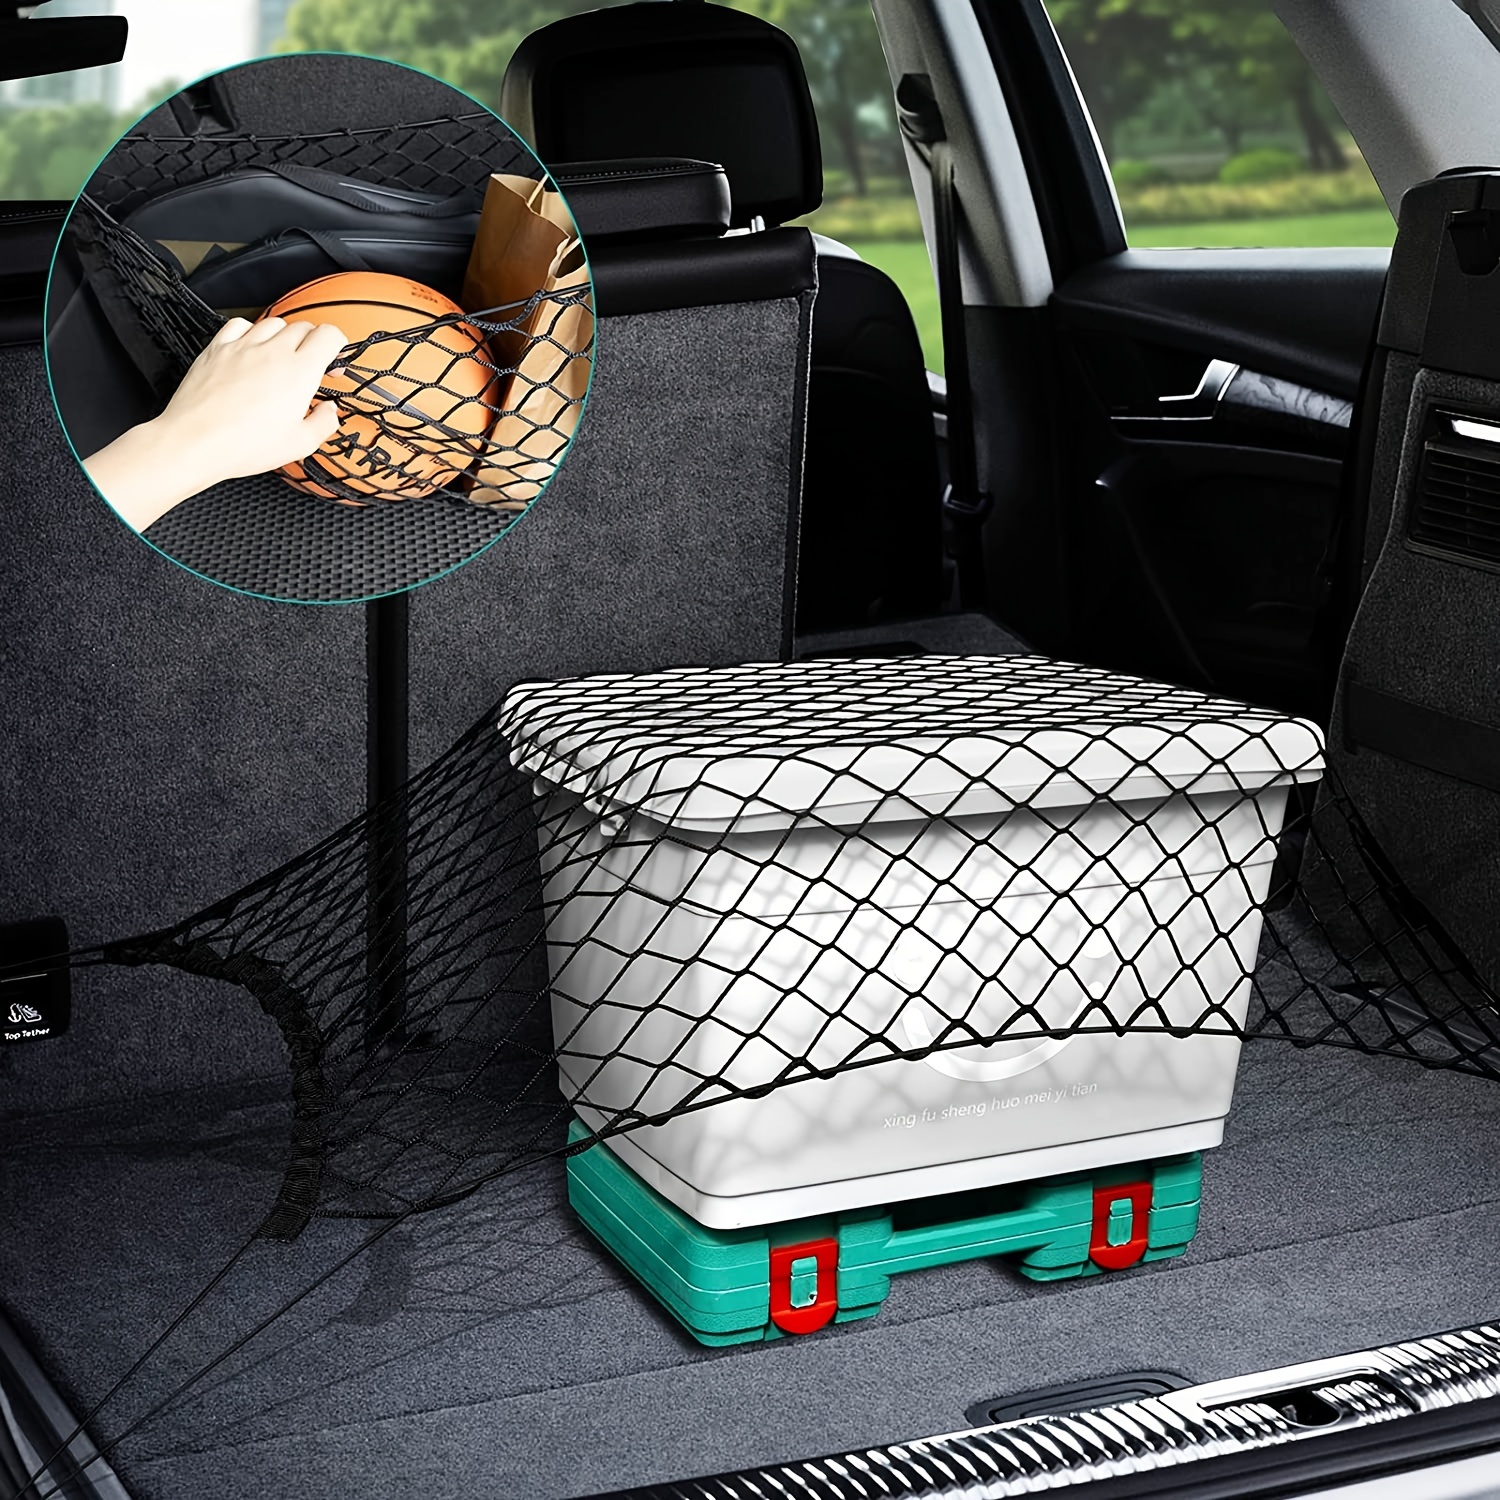 Maximize Your Car's Storage Space with this Mesh Bag and Cargo Net Pocket!